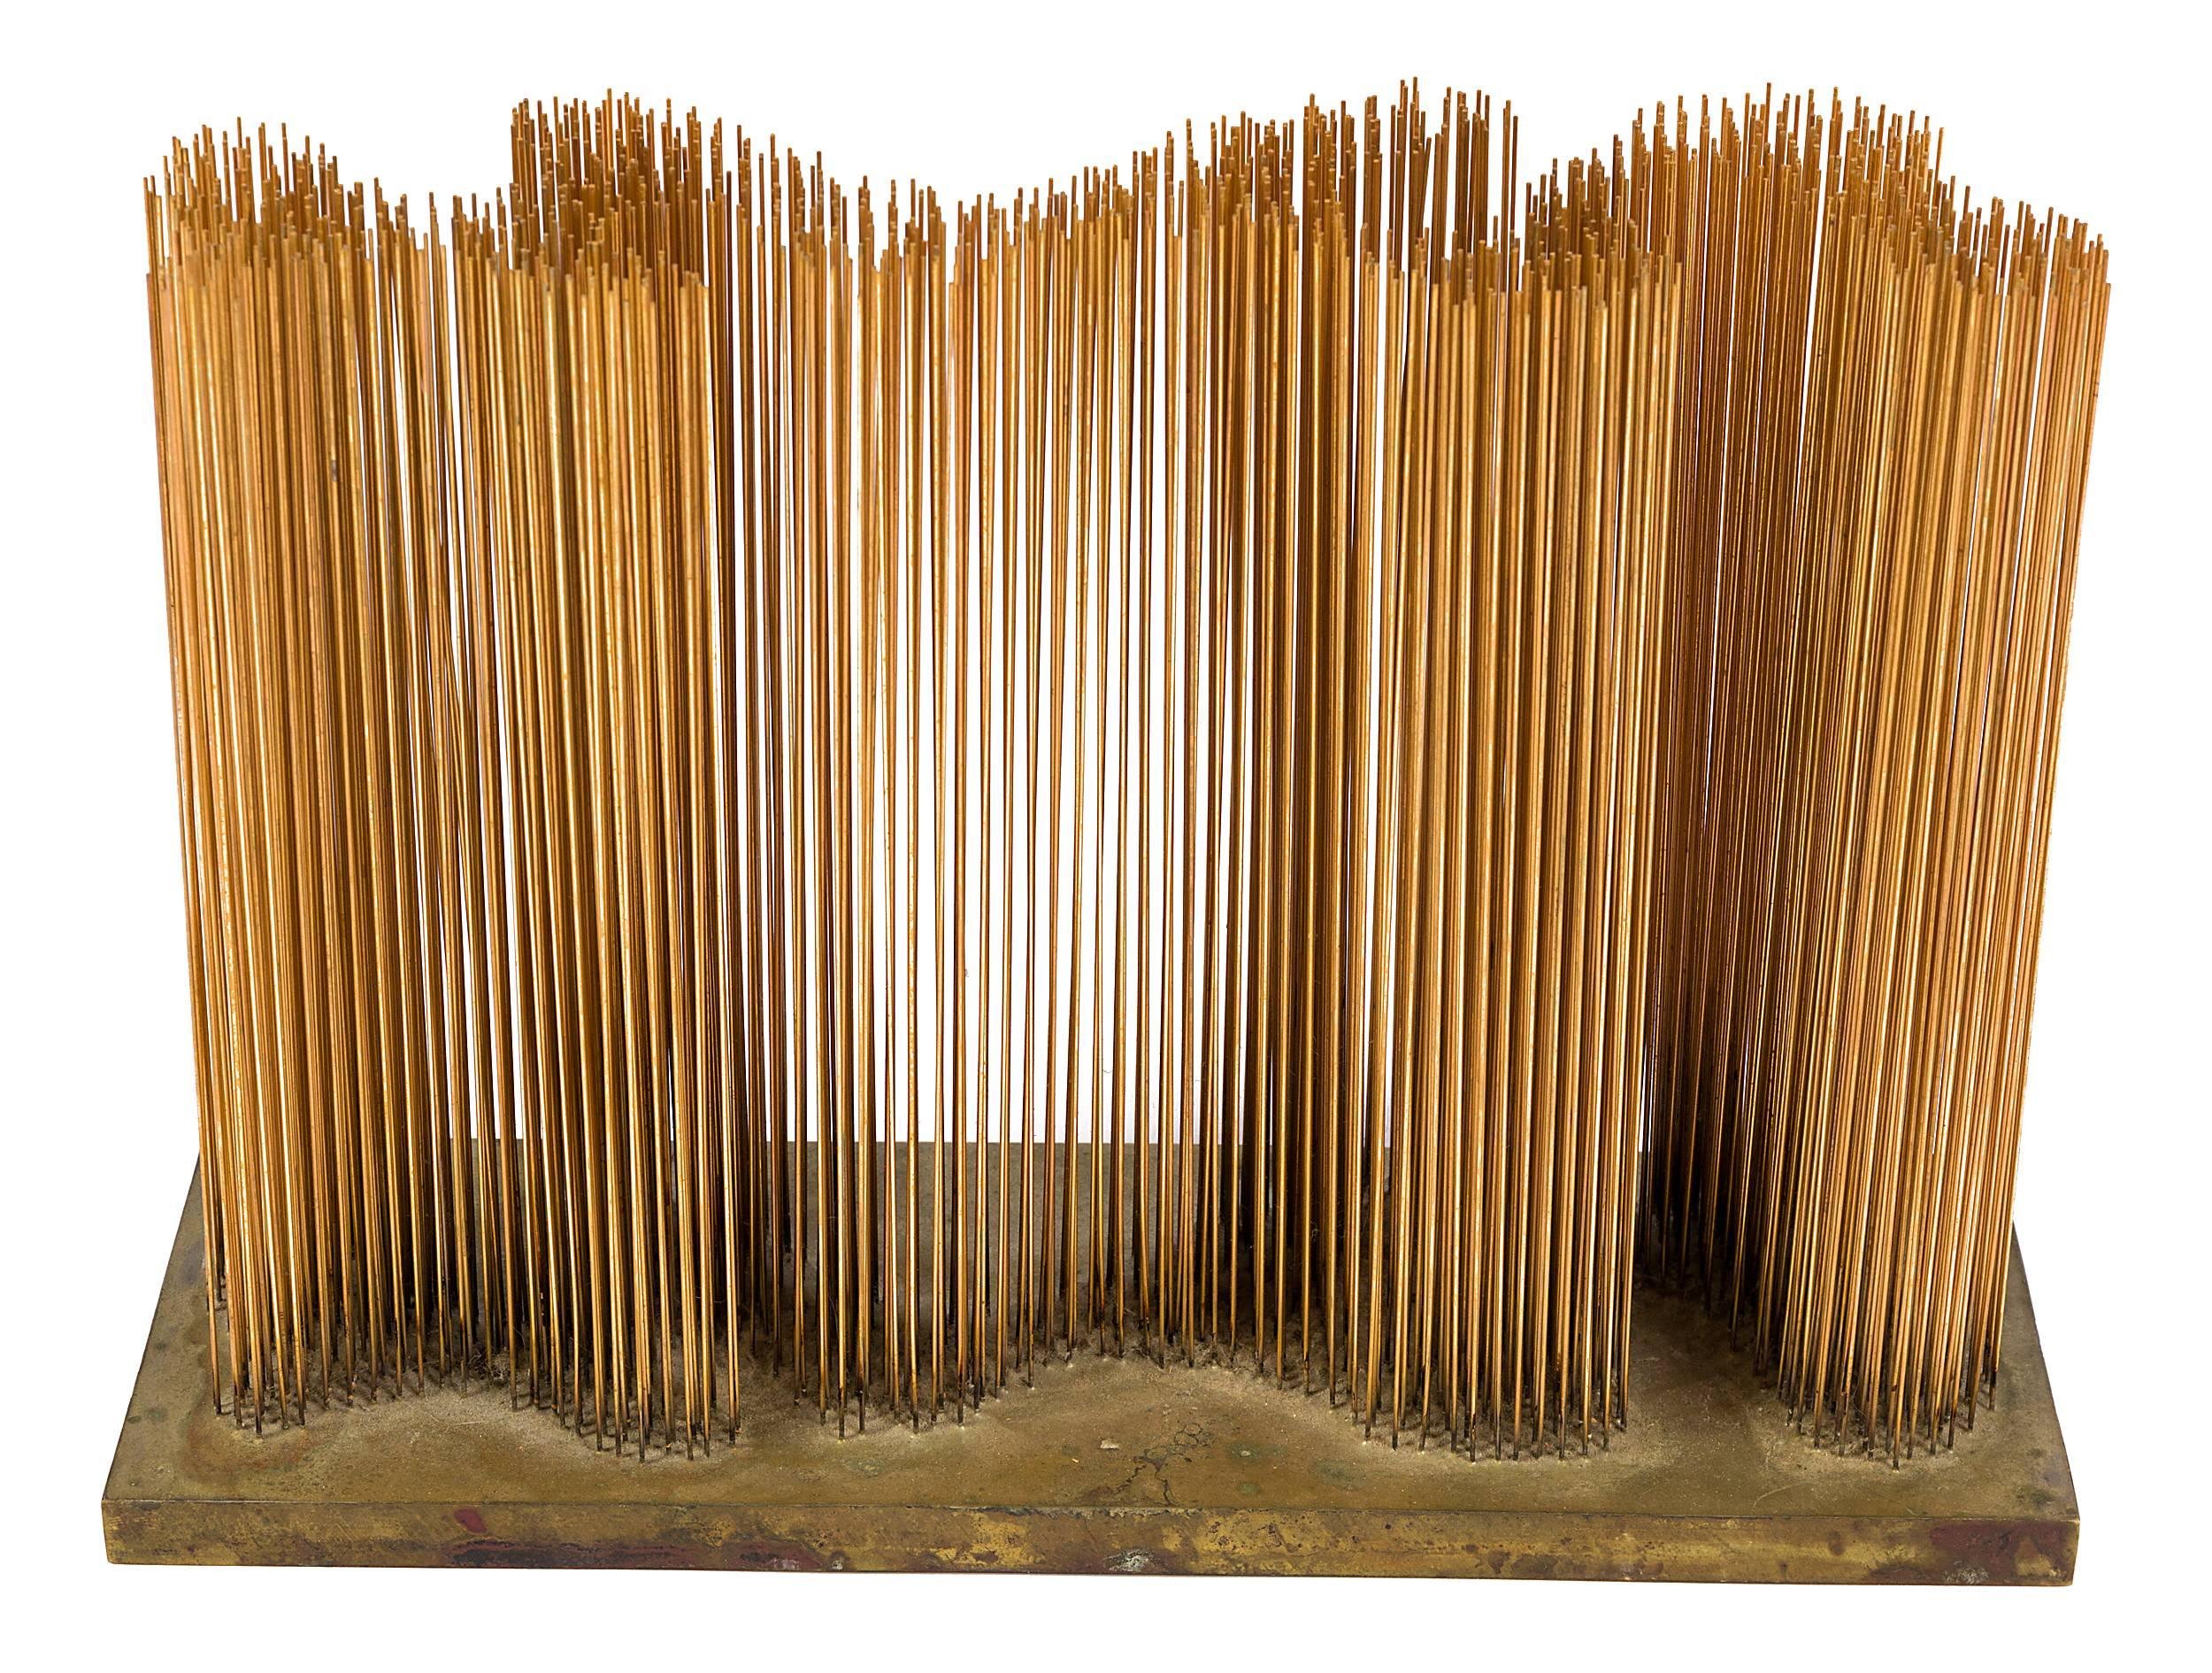 A sounding sculpture with straight vertical rods placed in an undulating wave pattern on a flat base. One of the rare small fine wire sonambients that produce a distinctive resonant sound.